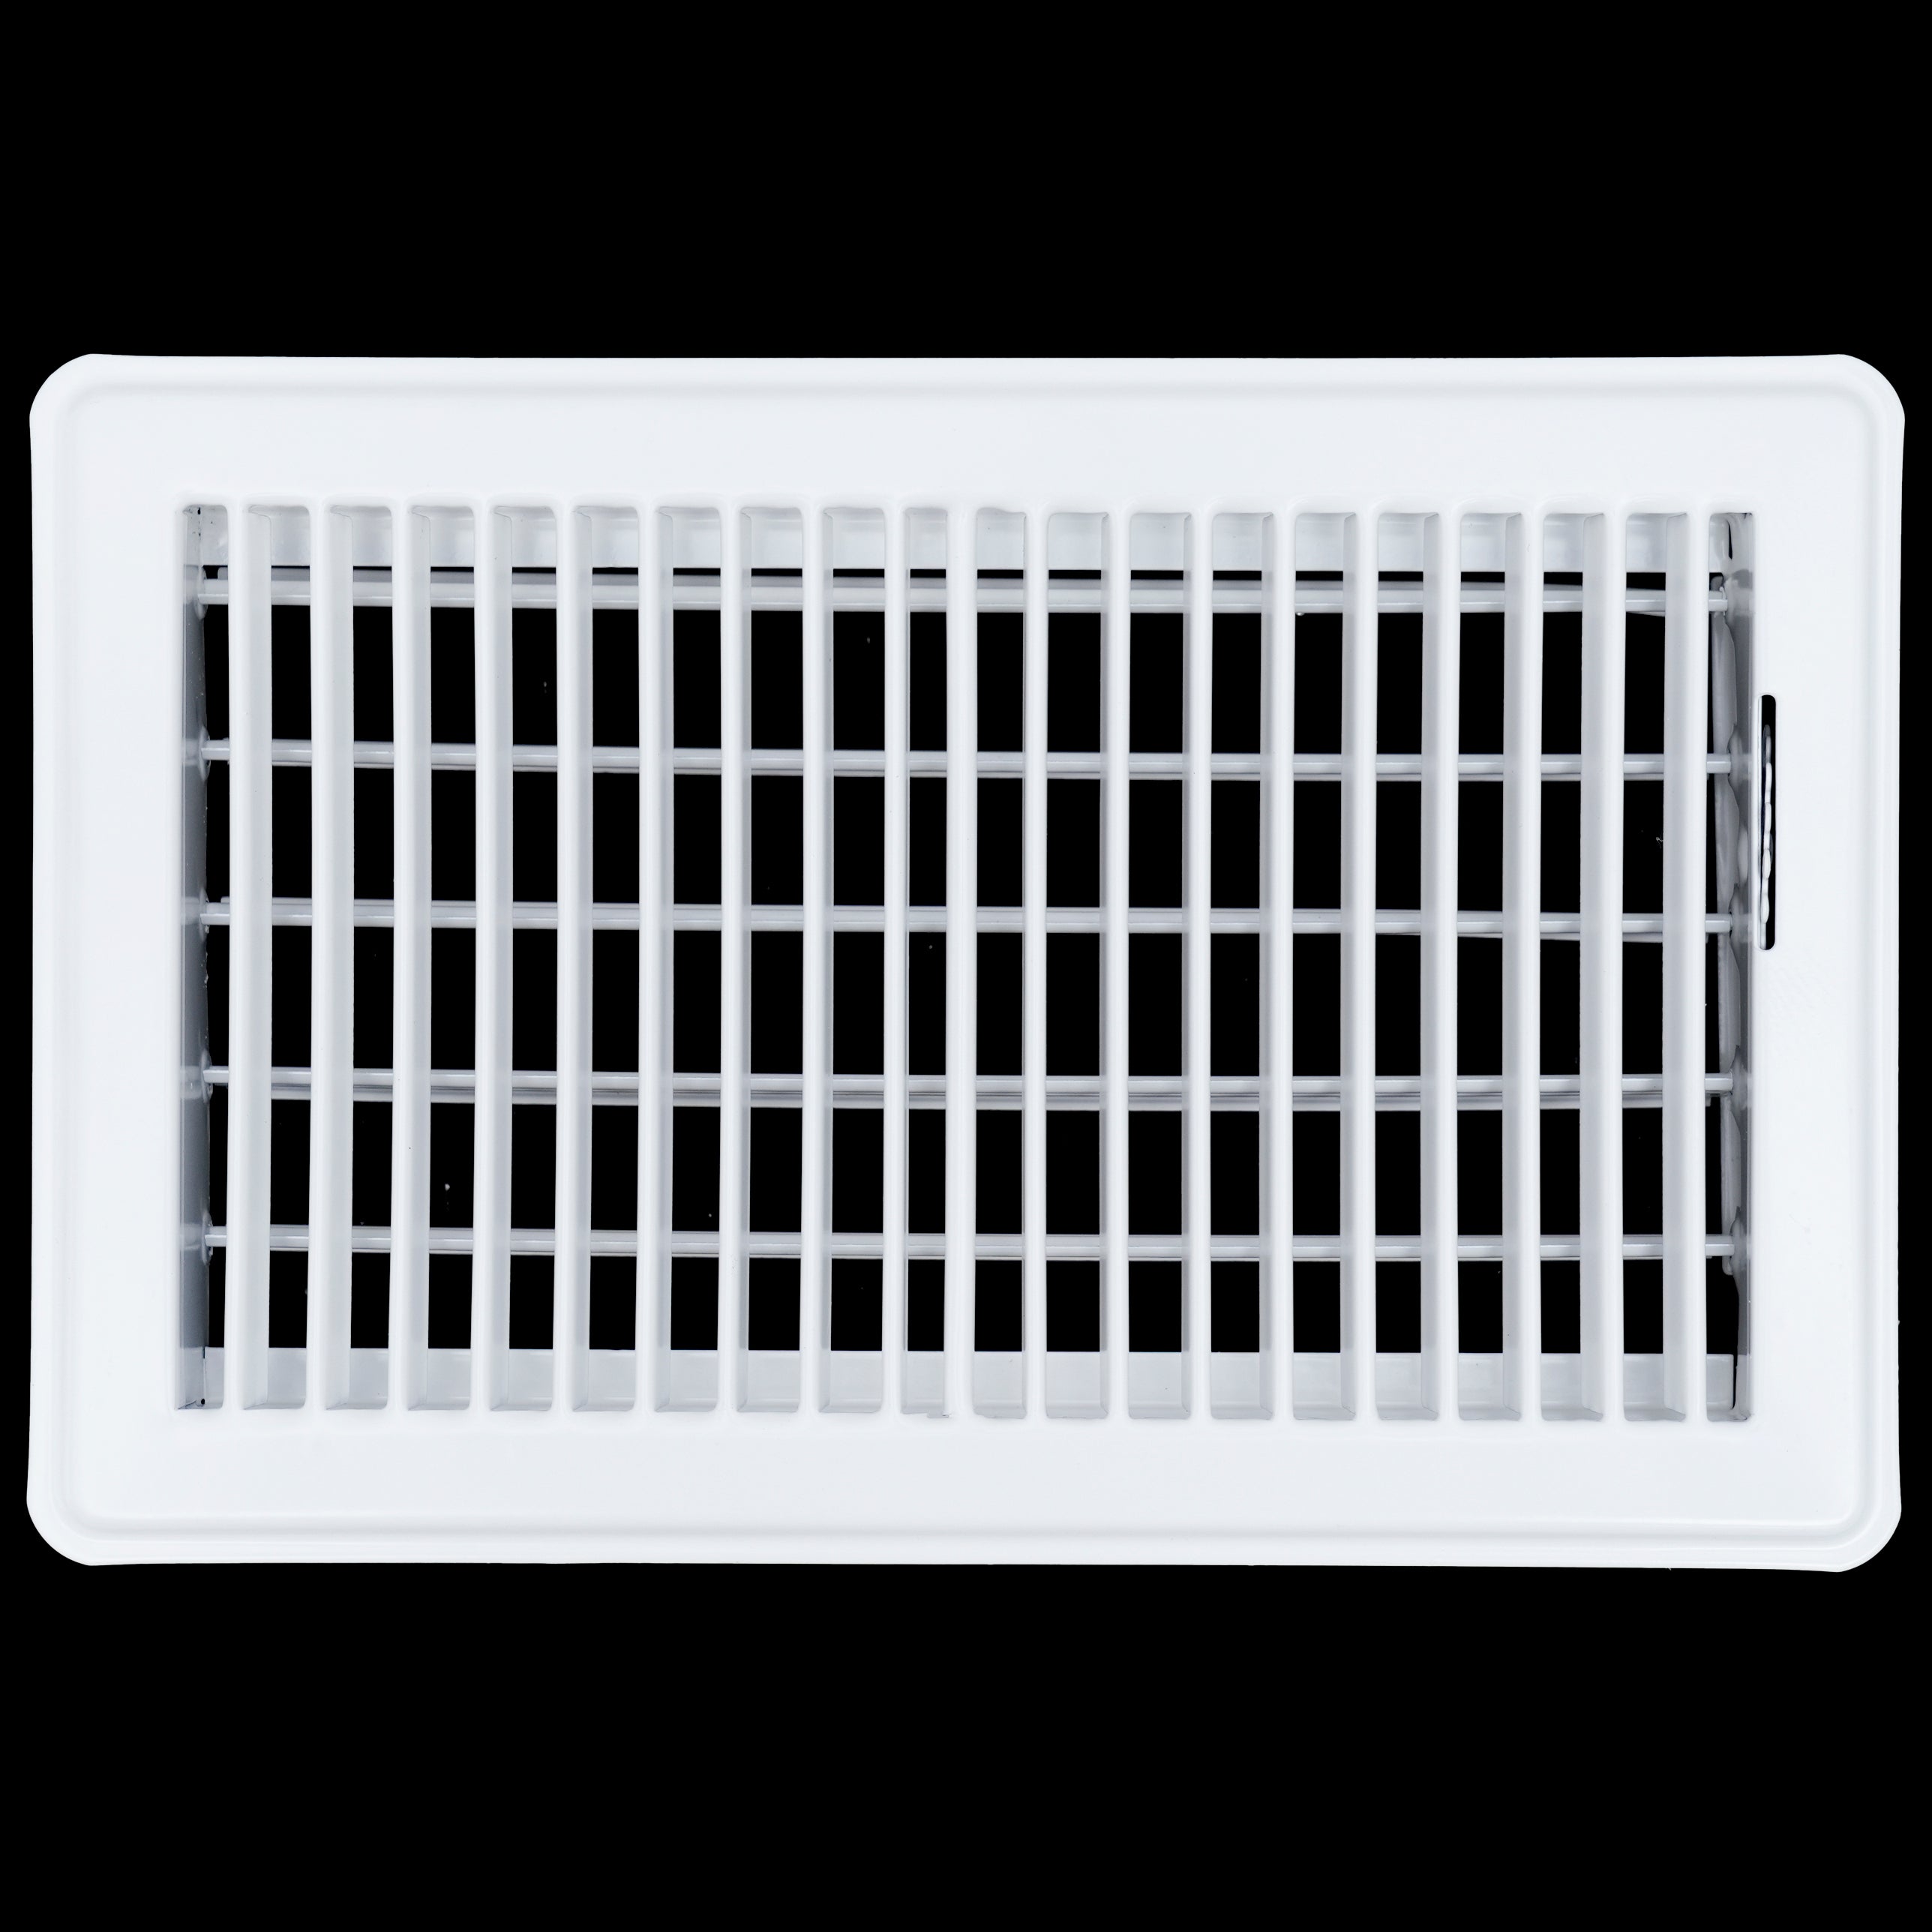 airgrilles 6" x 10" floor register with louvered design heavy duty walkable design with damper floor vent grille easy to adjust air supply lever white hnd-flg-wh-6x10  1